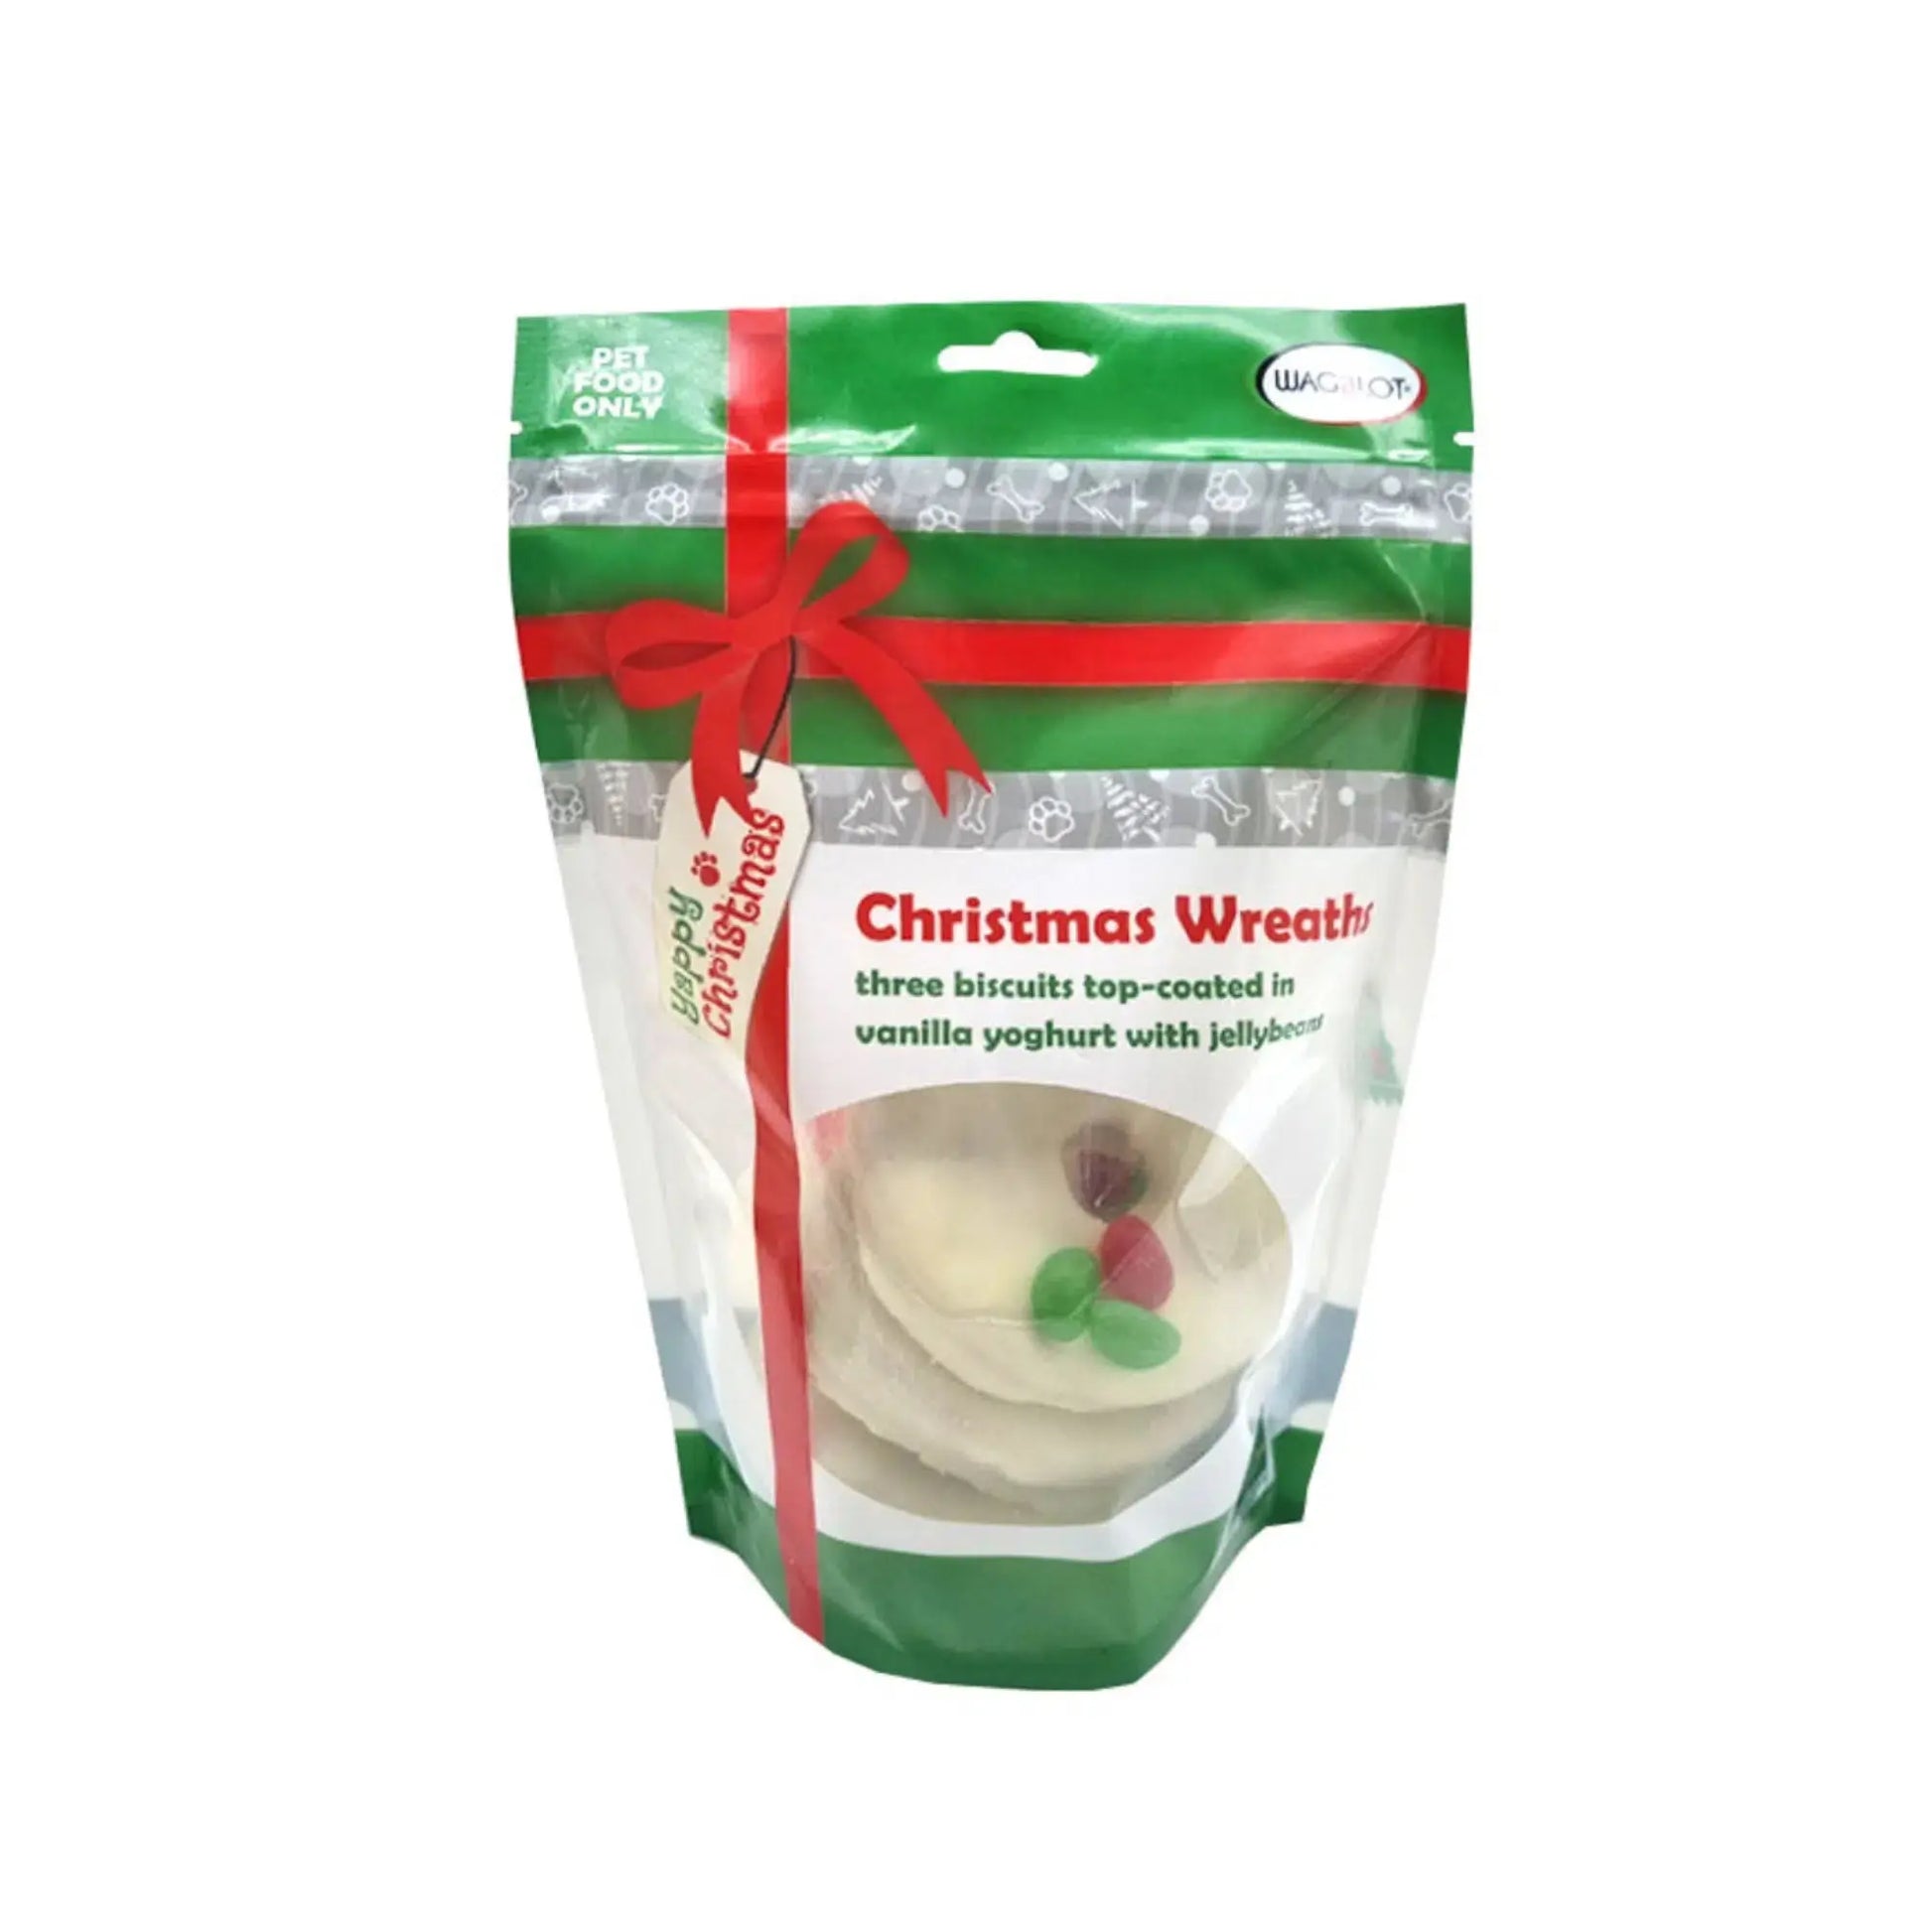 WAGALOT | Christmas Wreaths 3-pack | Buy Online at DOGUE Australia